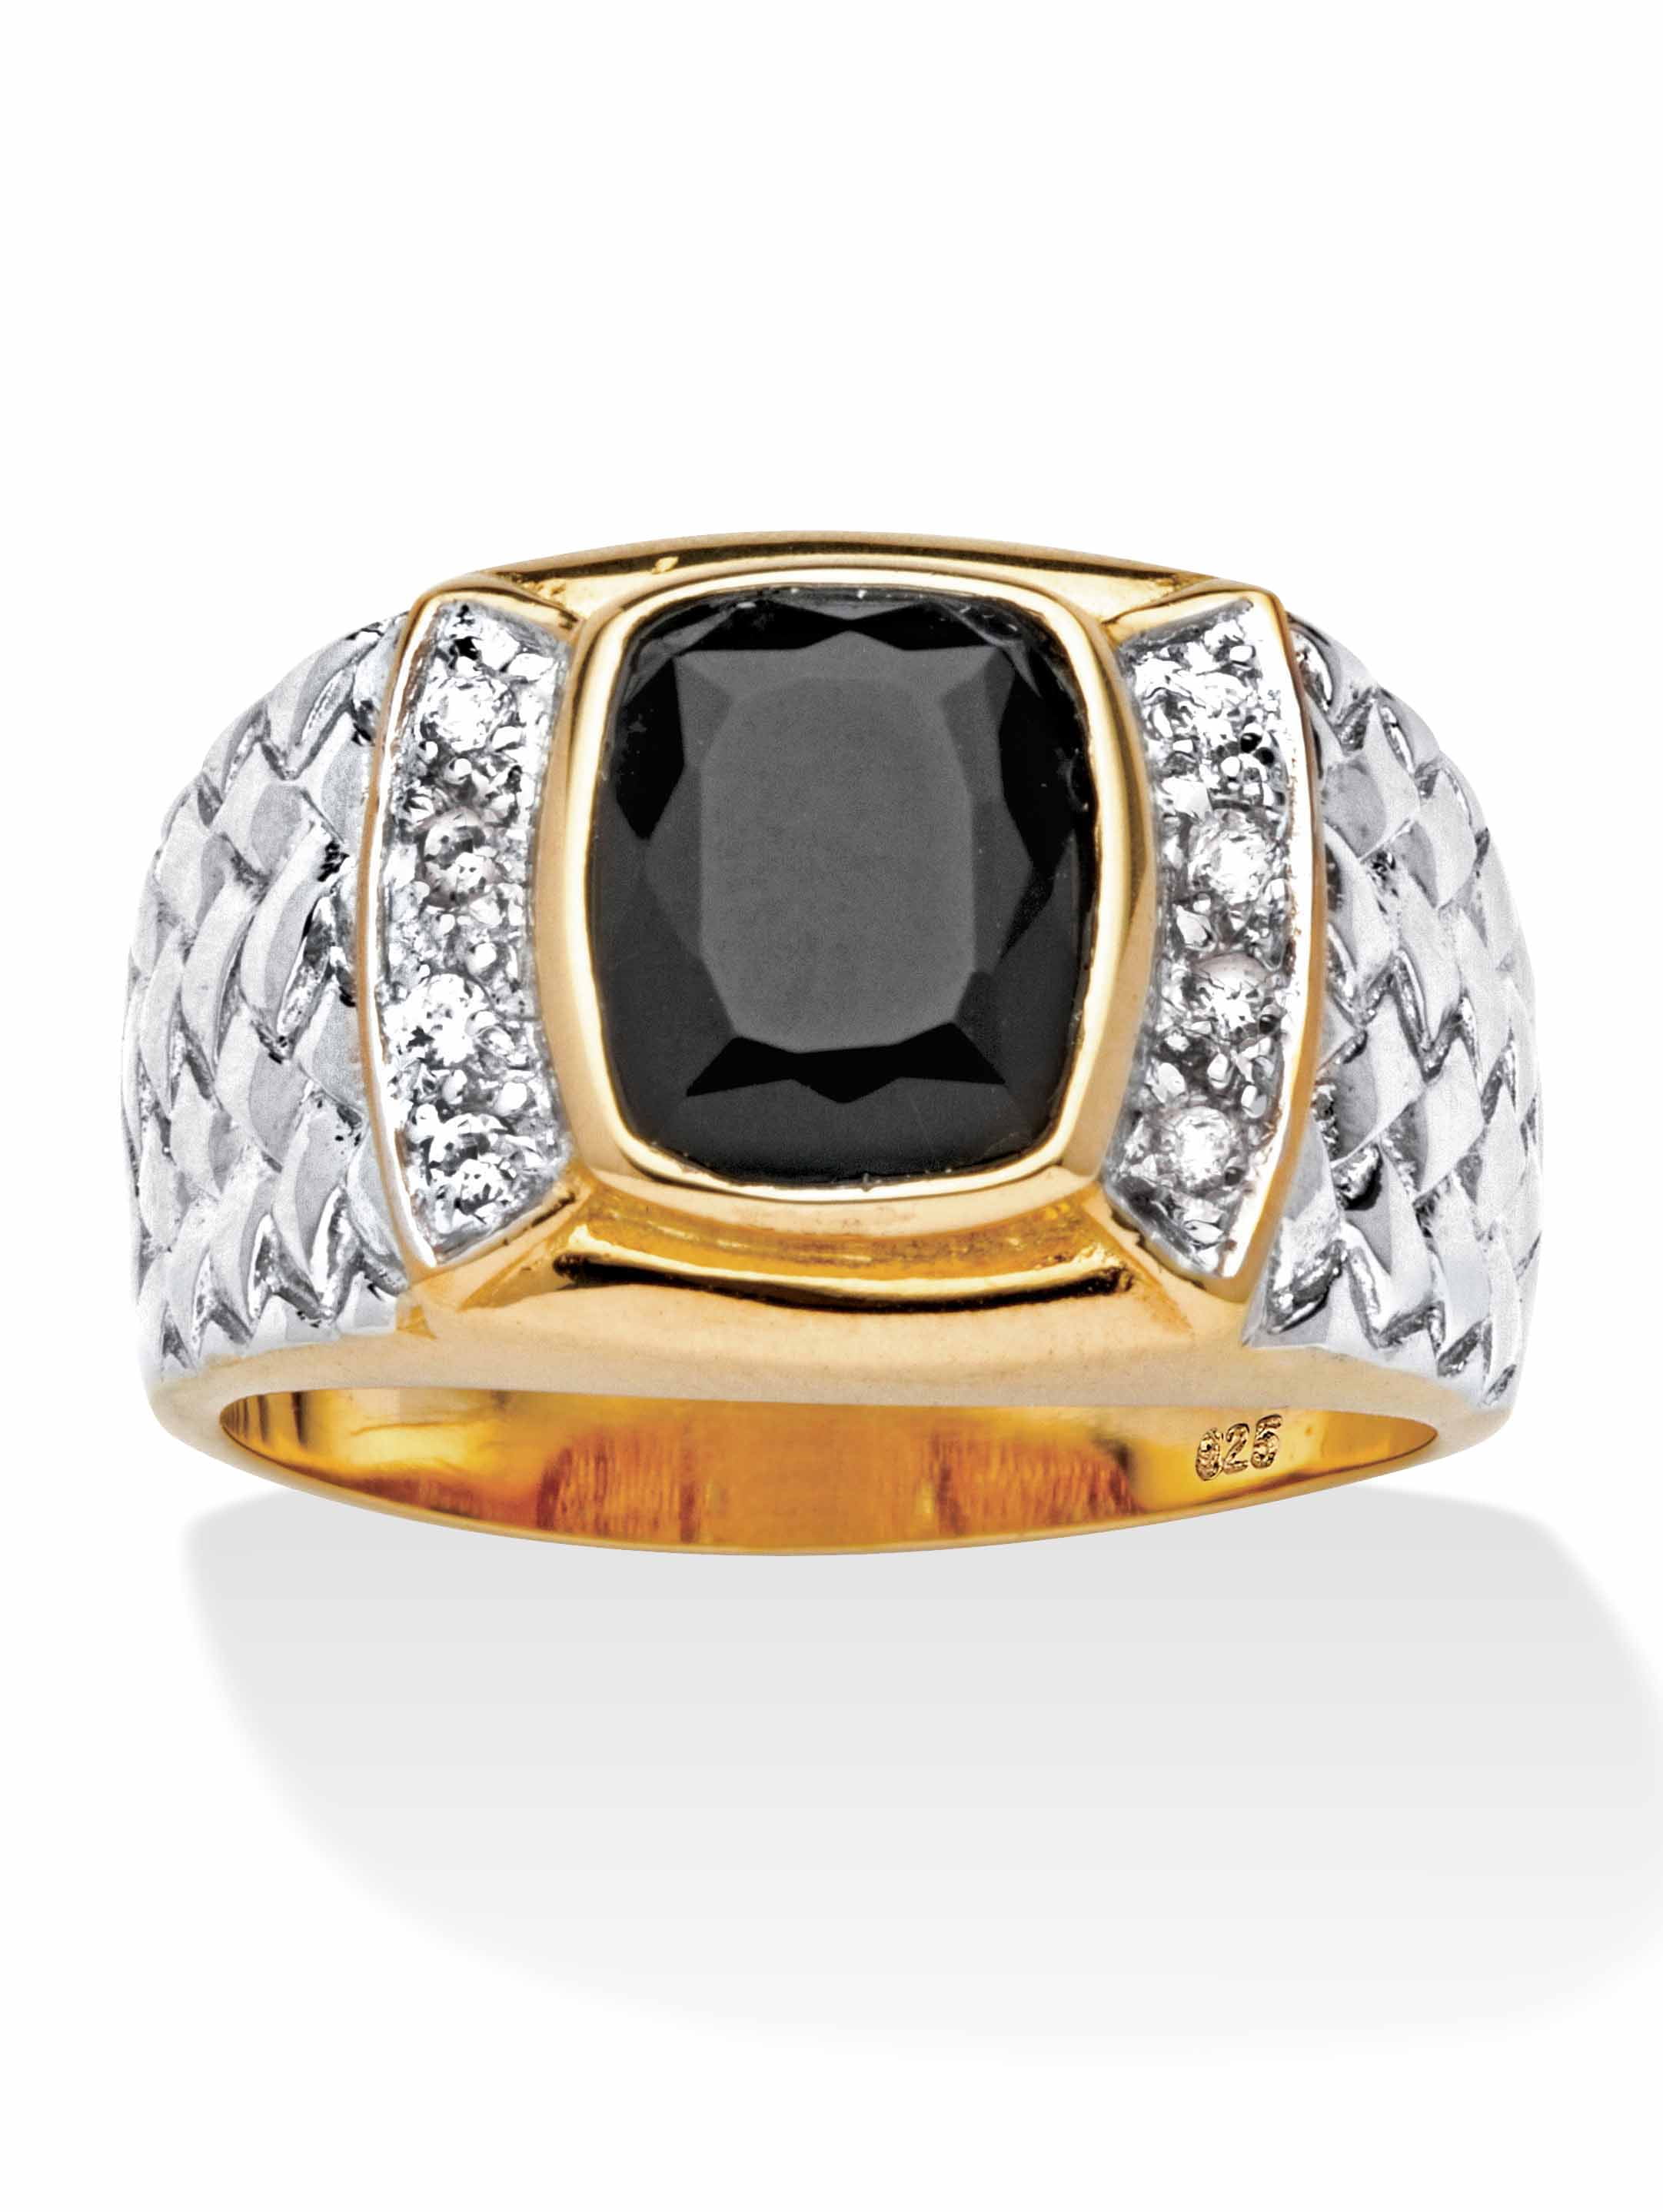 Men's Cushion-Cut Onyx and Cubic Zirconia Ring in 14k Gold over ...